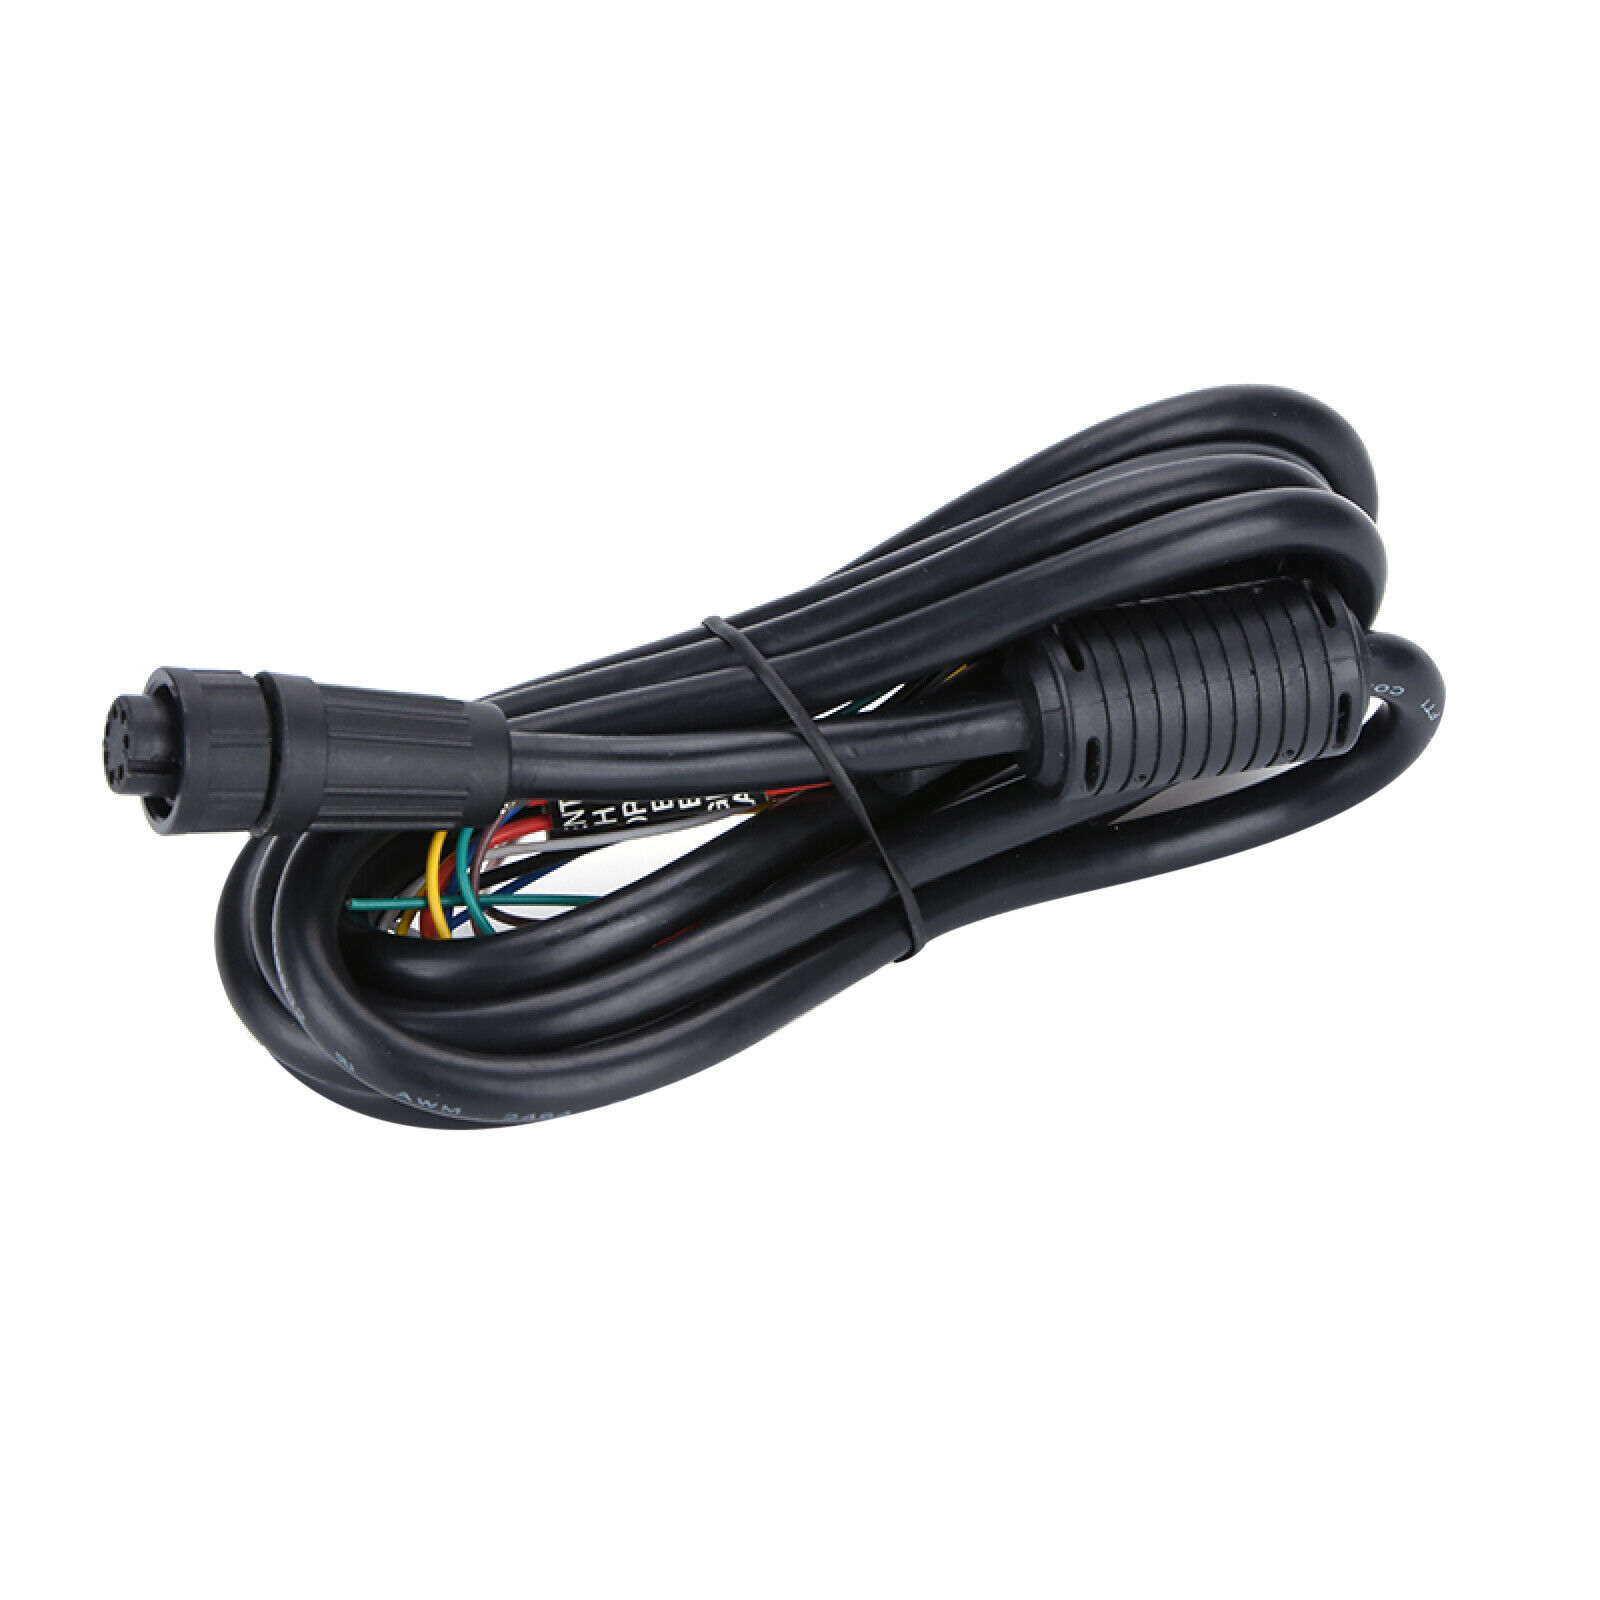 Durable 7-Pin Power Cable For GARMIN POWER CABLE GPSMAP 128 152 192C 580 GPS